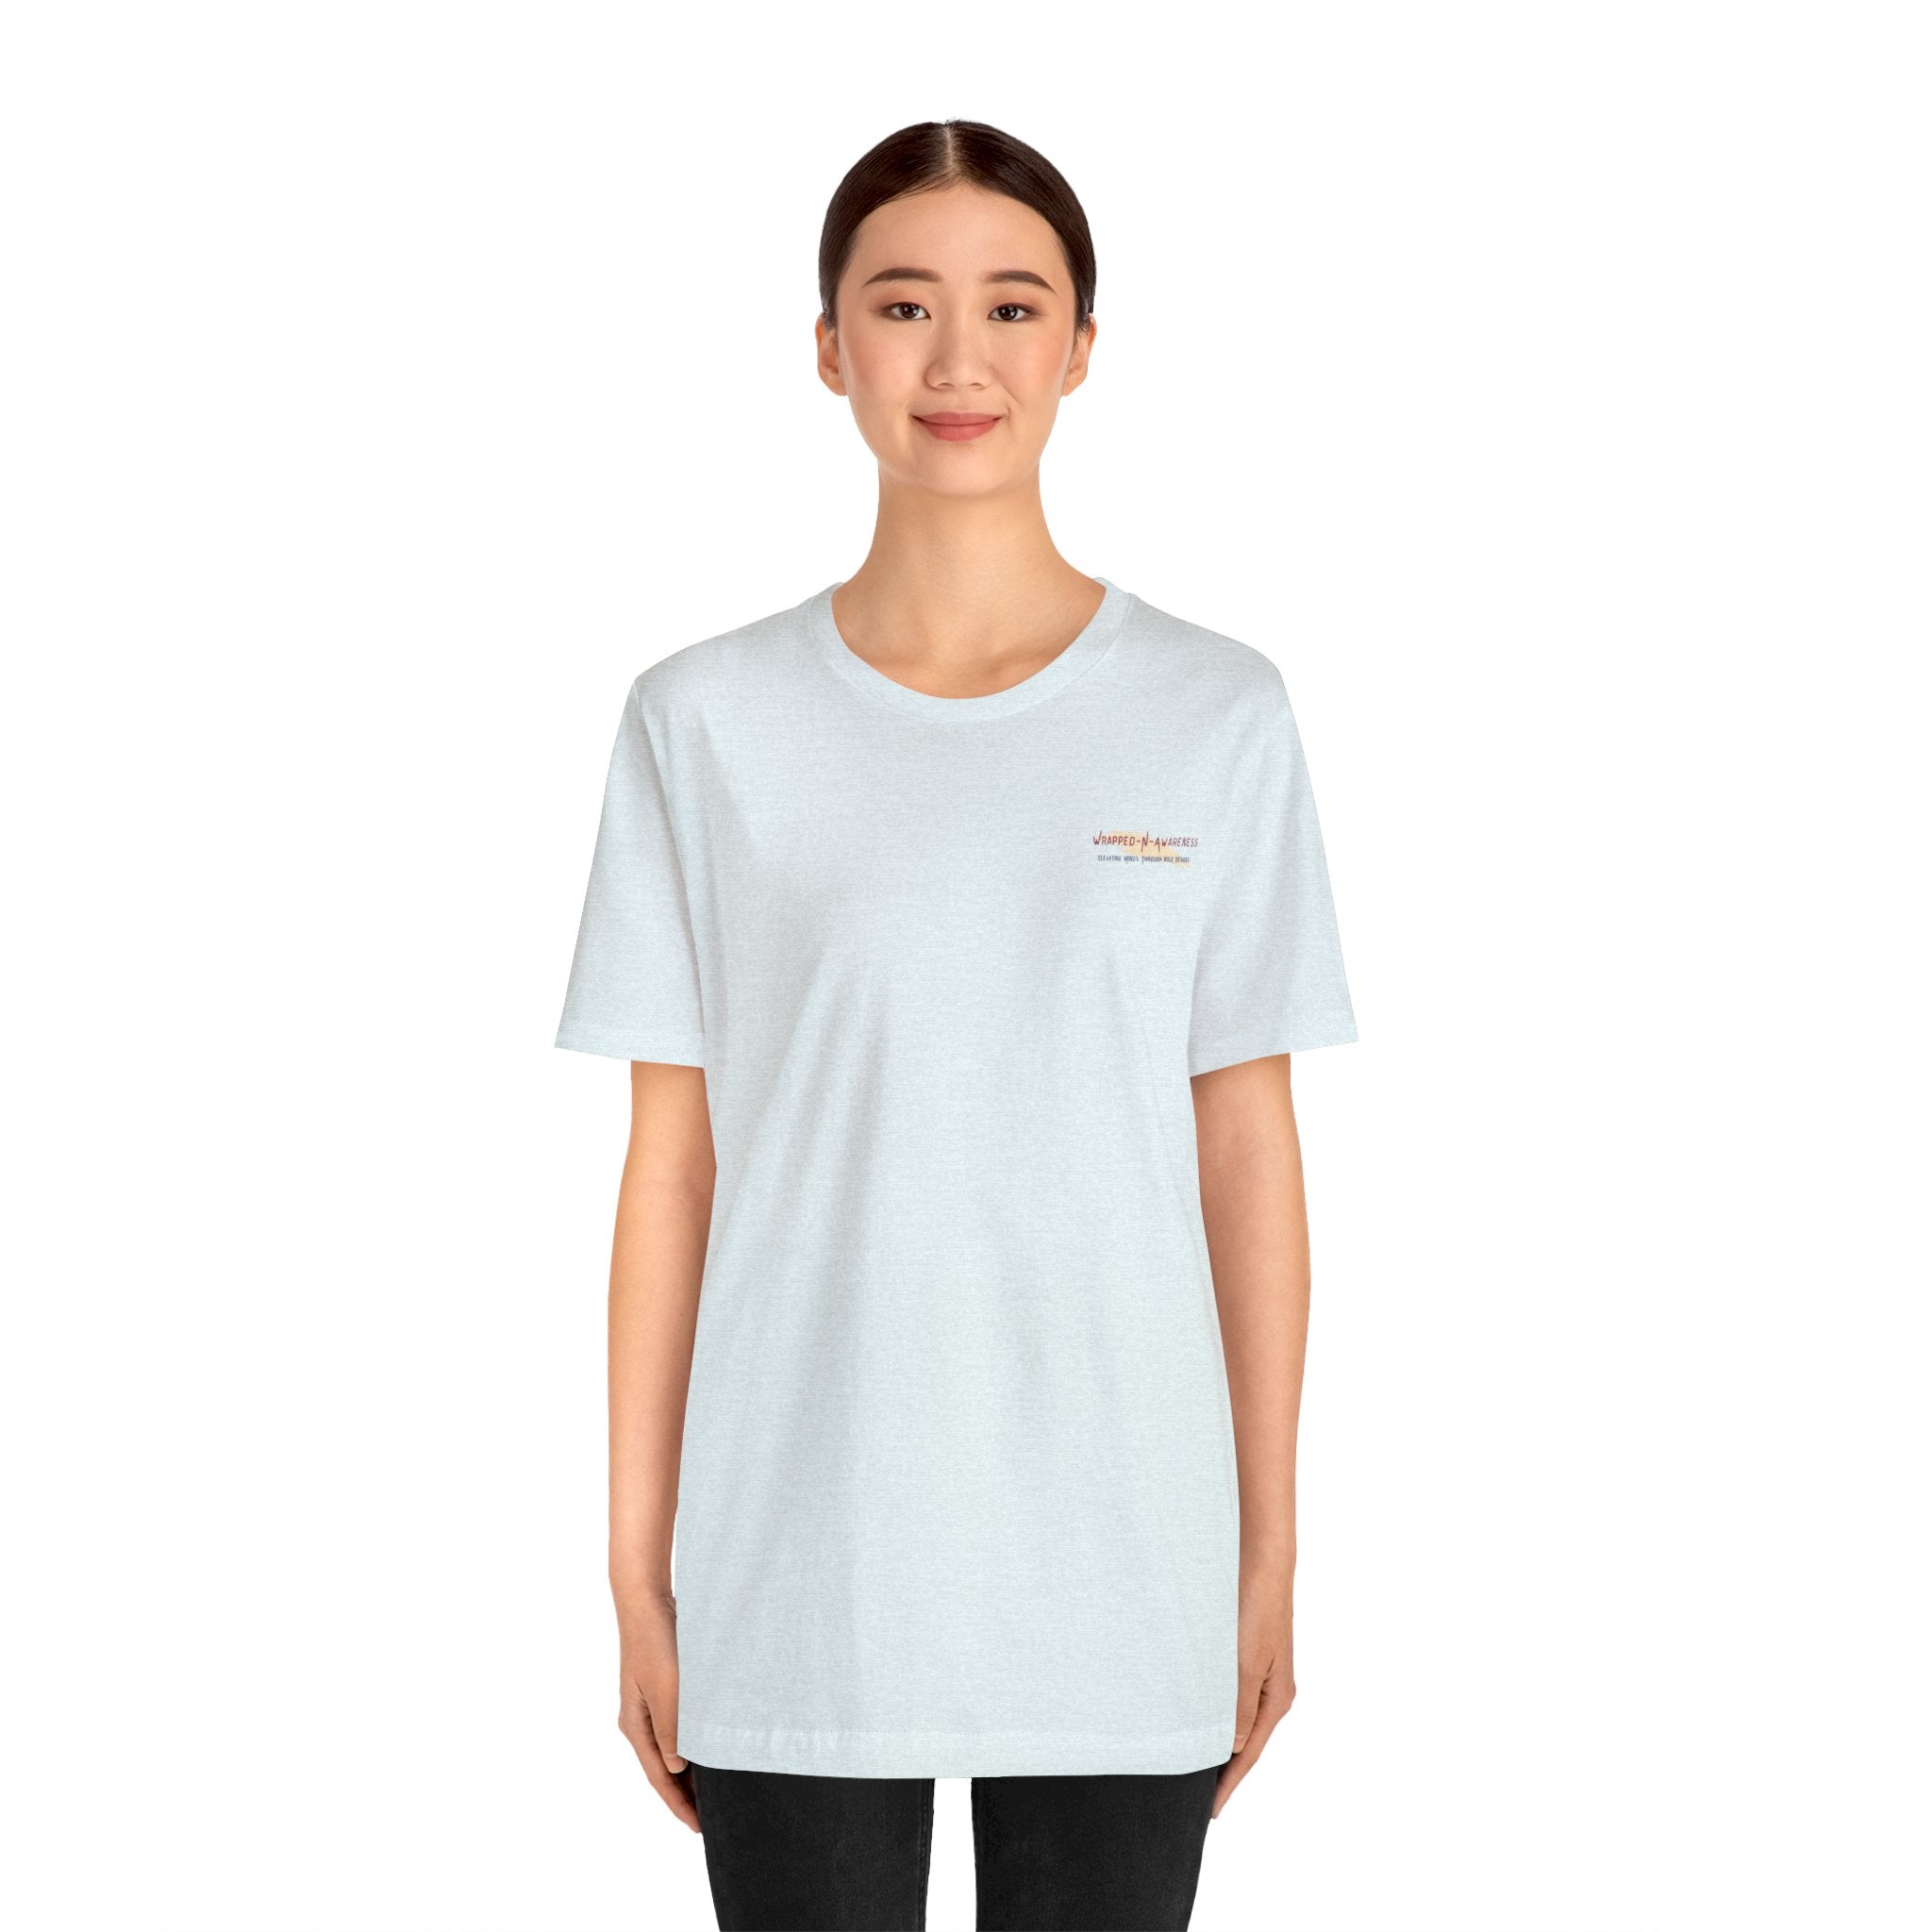 Find Your Balance Jersey Tee - Bella+Canvas 3001 Heather Mauve Airlume Cotton Bella+Canvas 3001 Crew Neckline Jersey Short Sleeve Lightweight Fabric Mental Health Support Retail Fit Tear-away Label Tee Unisex Tee T-Shirt 15729587755403211497_2048 Printify